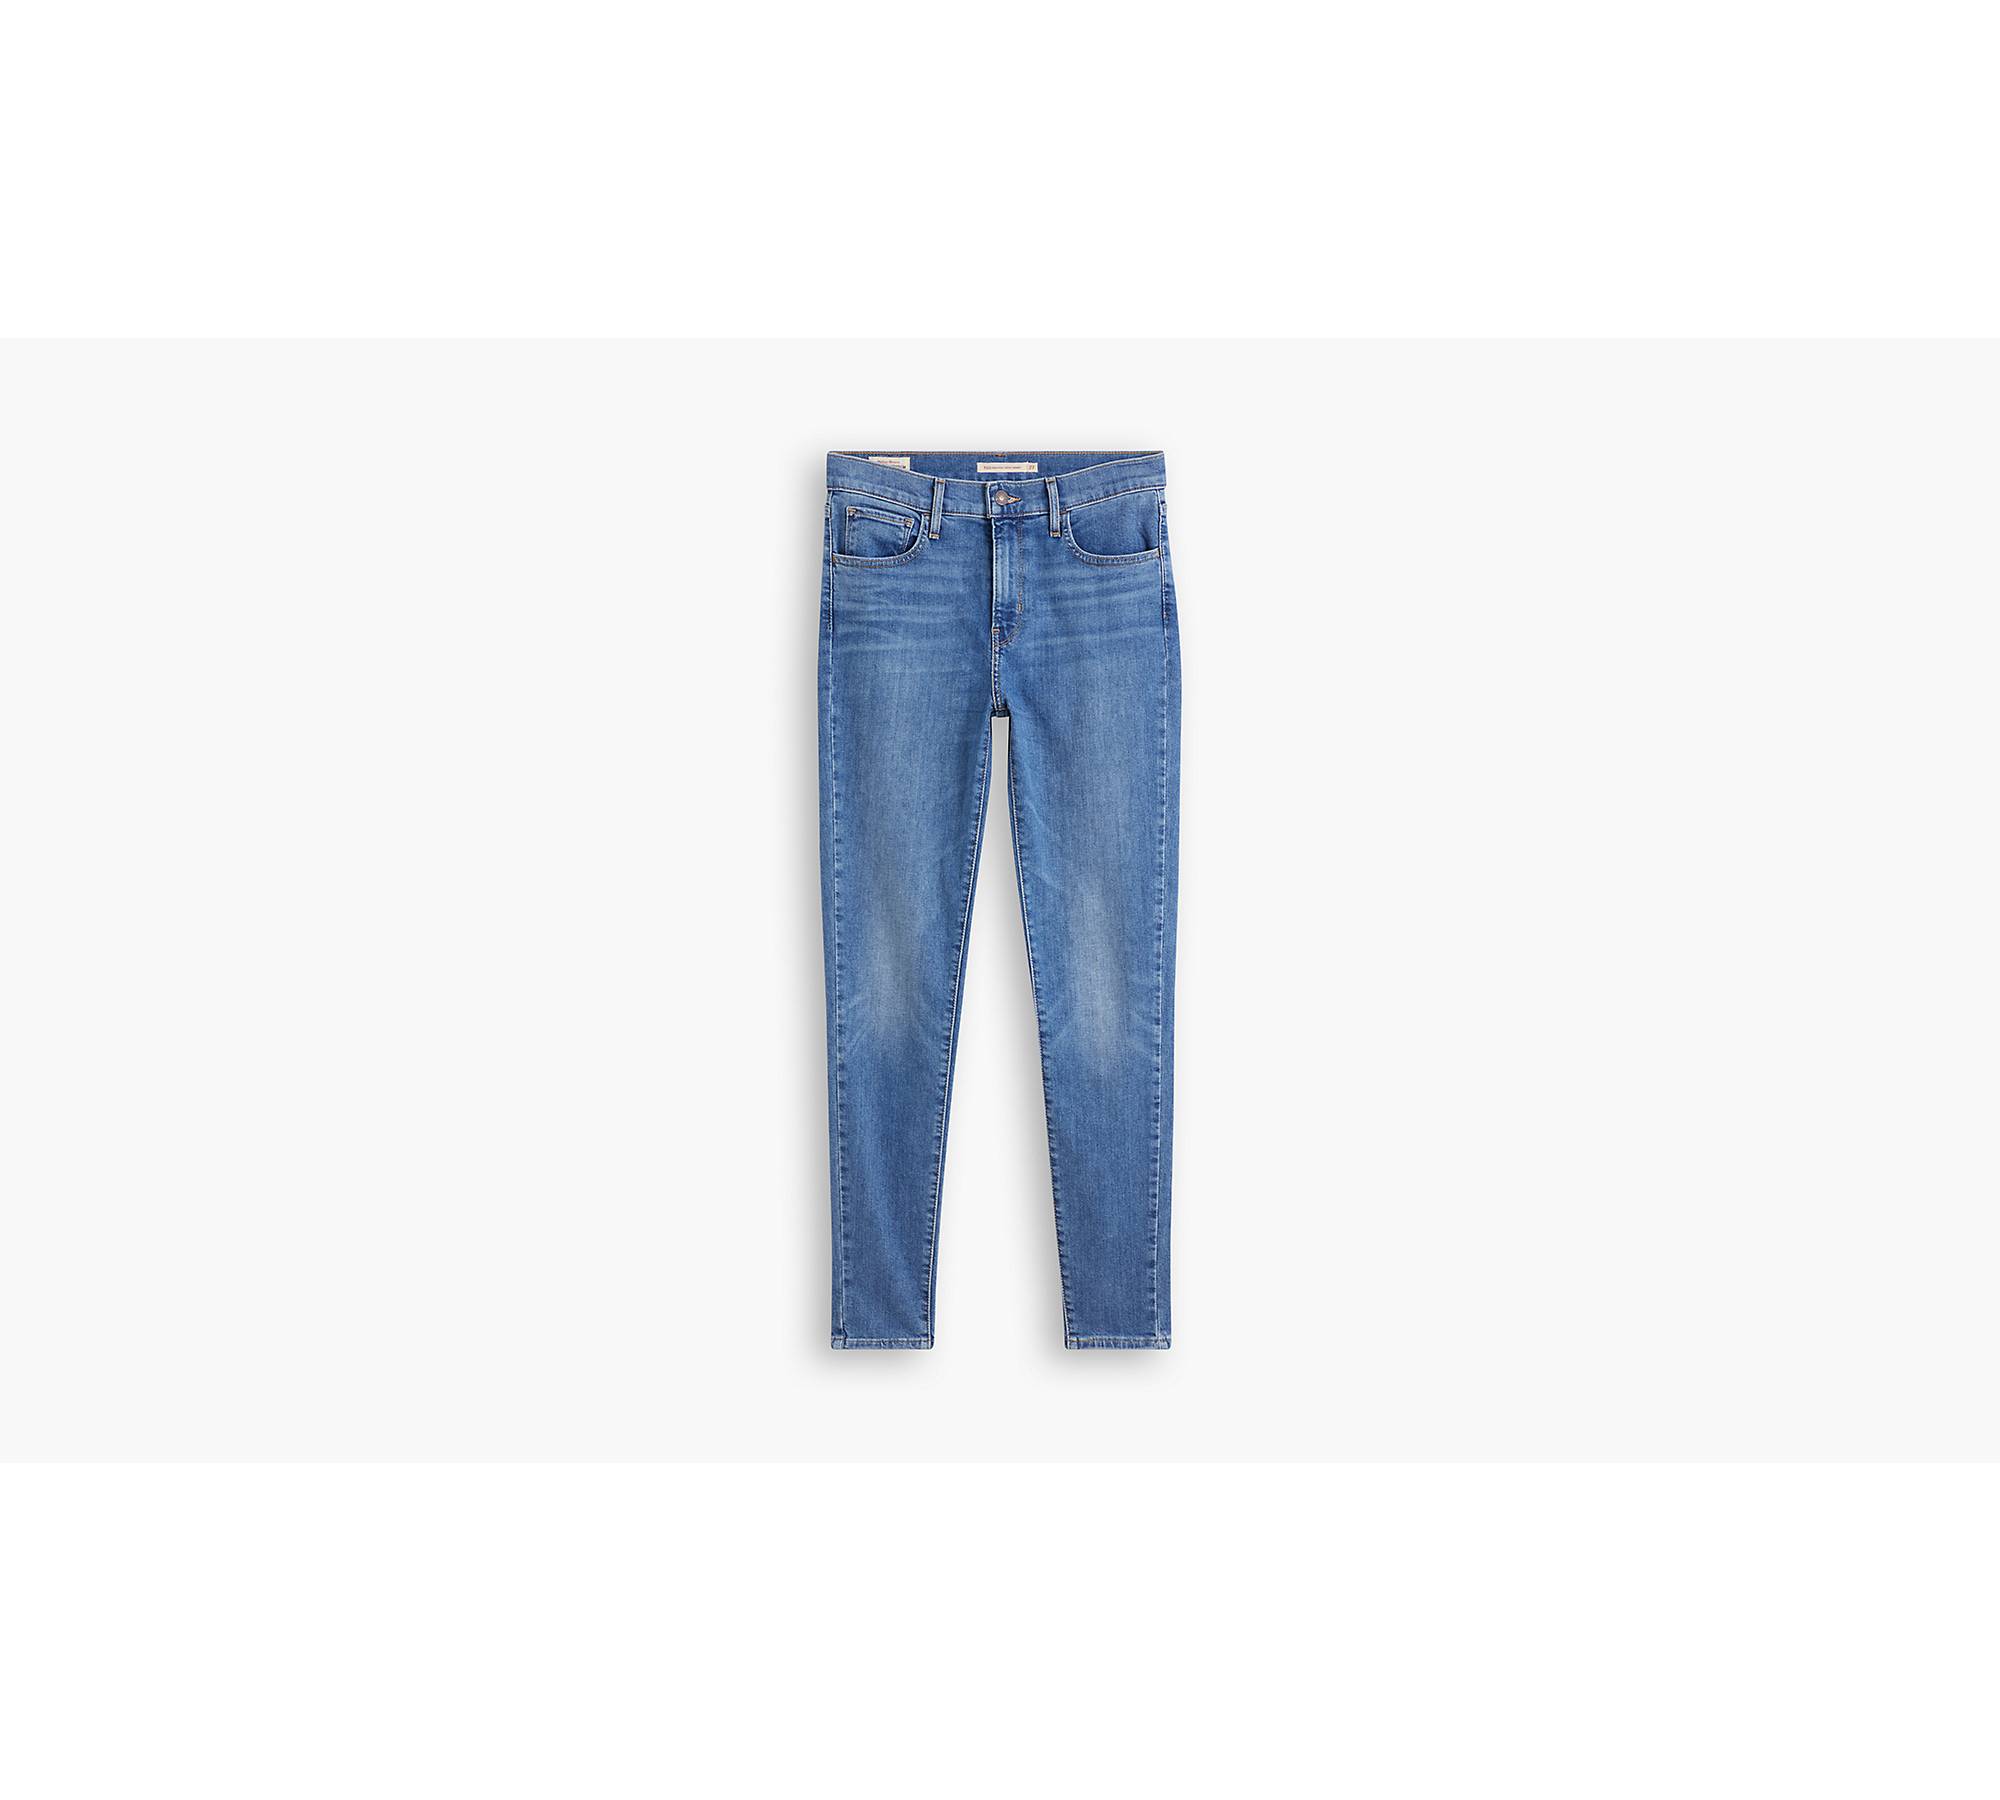 Jeans Mujer 720 High-Rise Super Skinny Azul Levis 52797-0024 - Jeans y  Pantalones